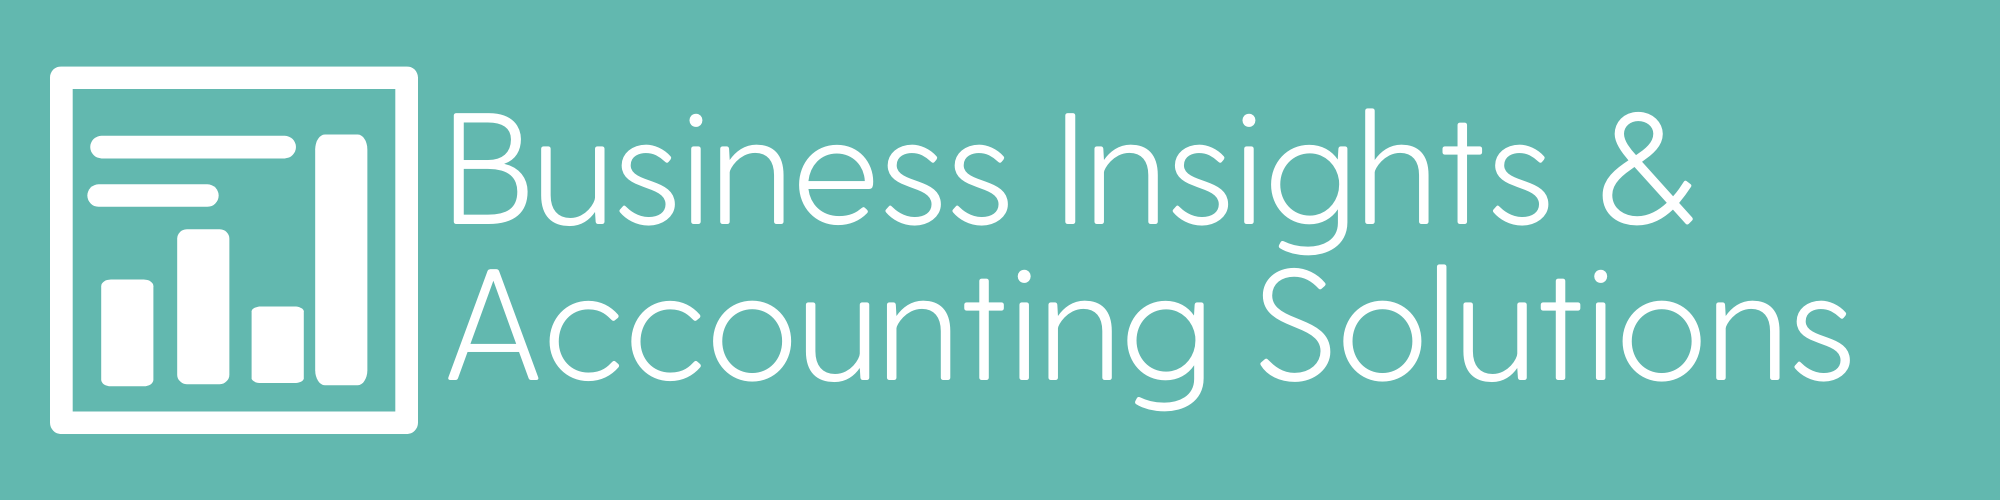 Business Insights & Accounting Solutions White on Teal with Name (new font)